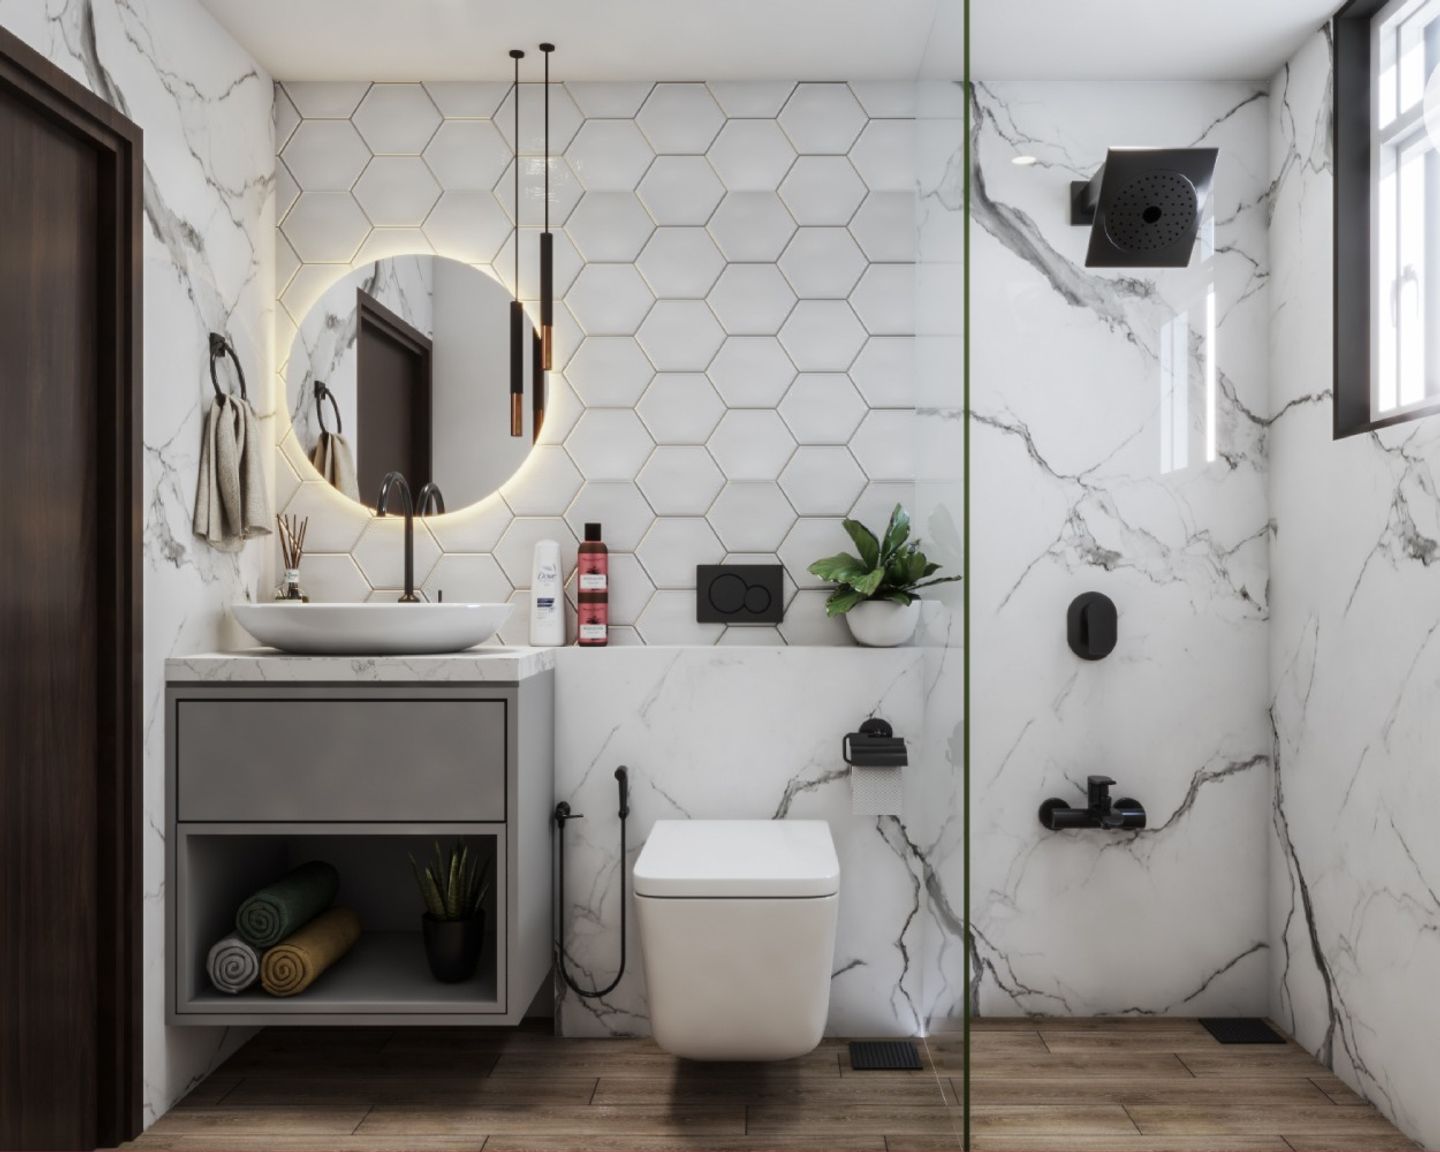 Small Bathroom Design With Wall-Mounted Vanity With Open And Closed Storage - Livspace